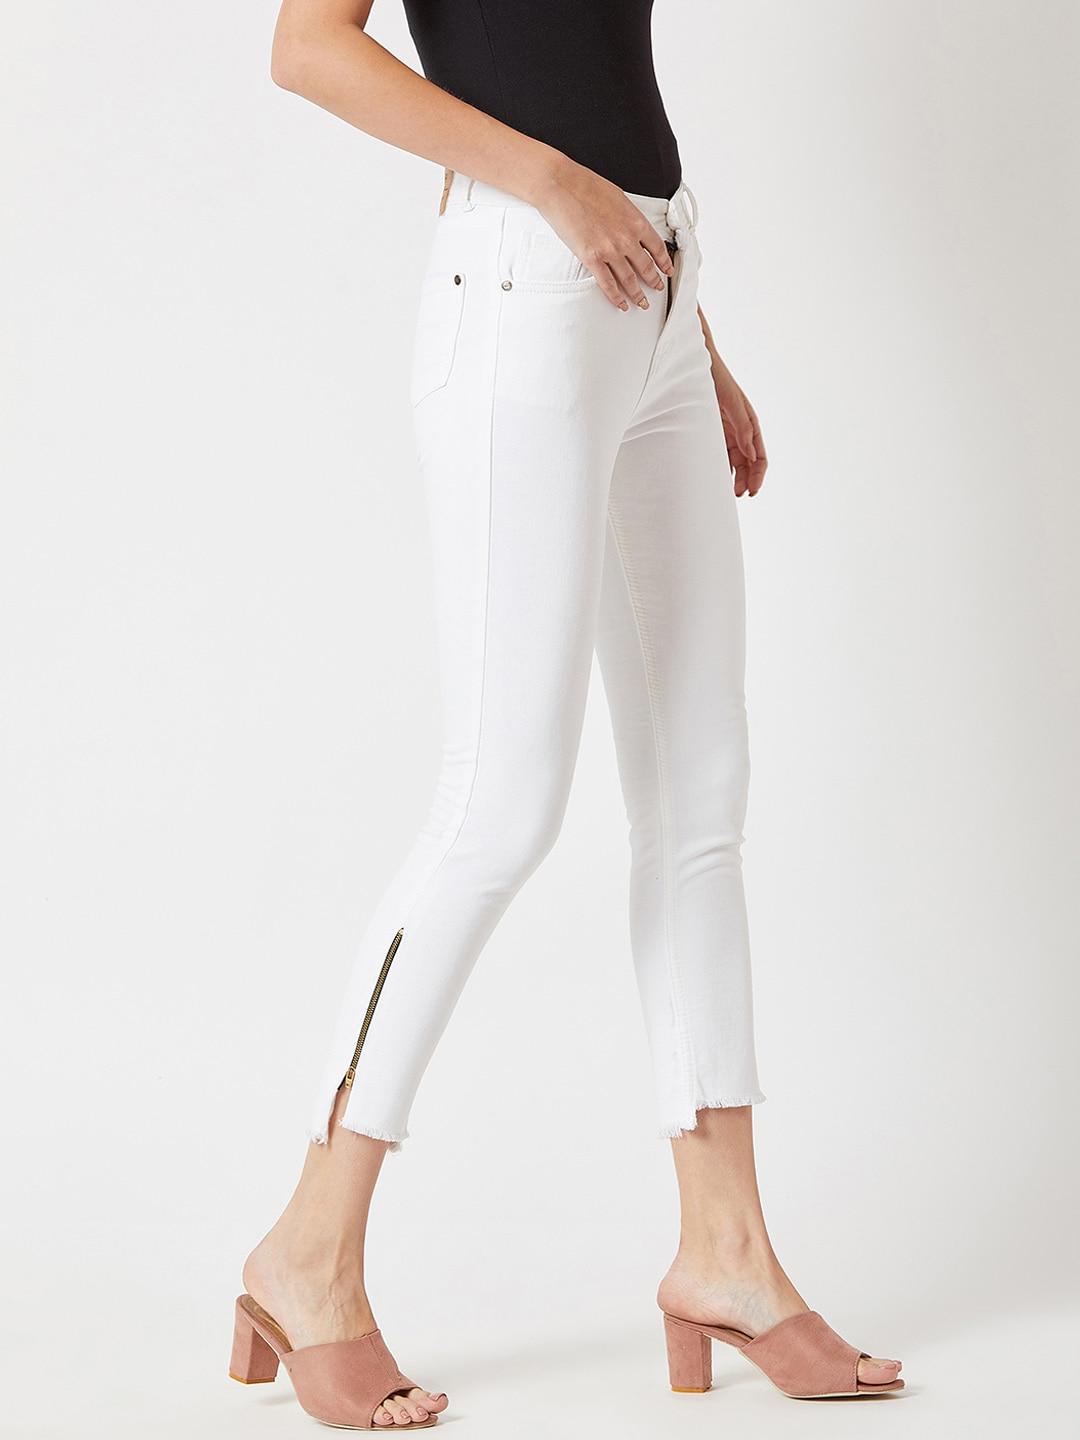 miss-chase-women-white-skinny-fit-high-rise-clean-look-cropped-jeans